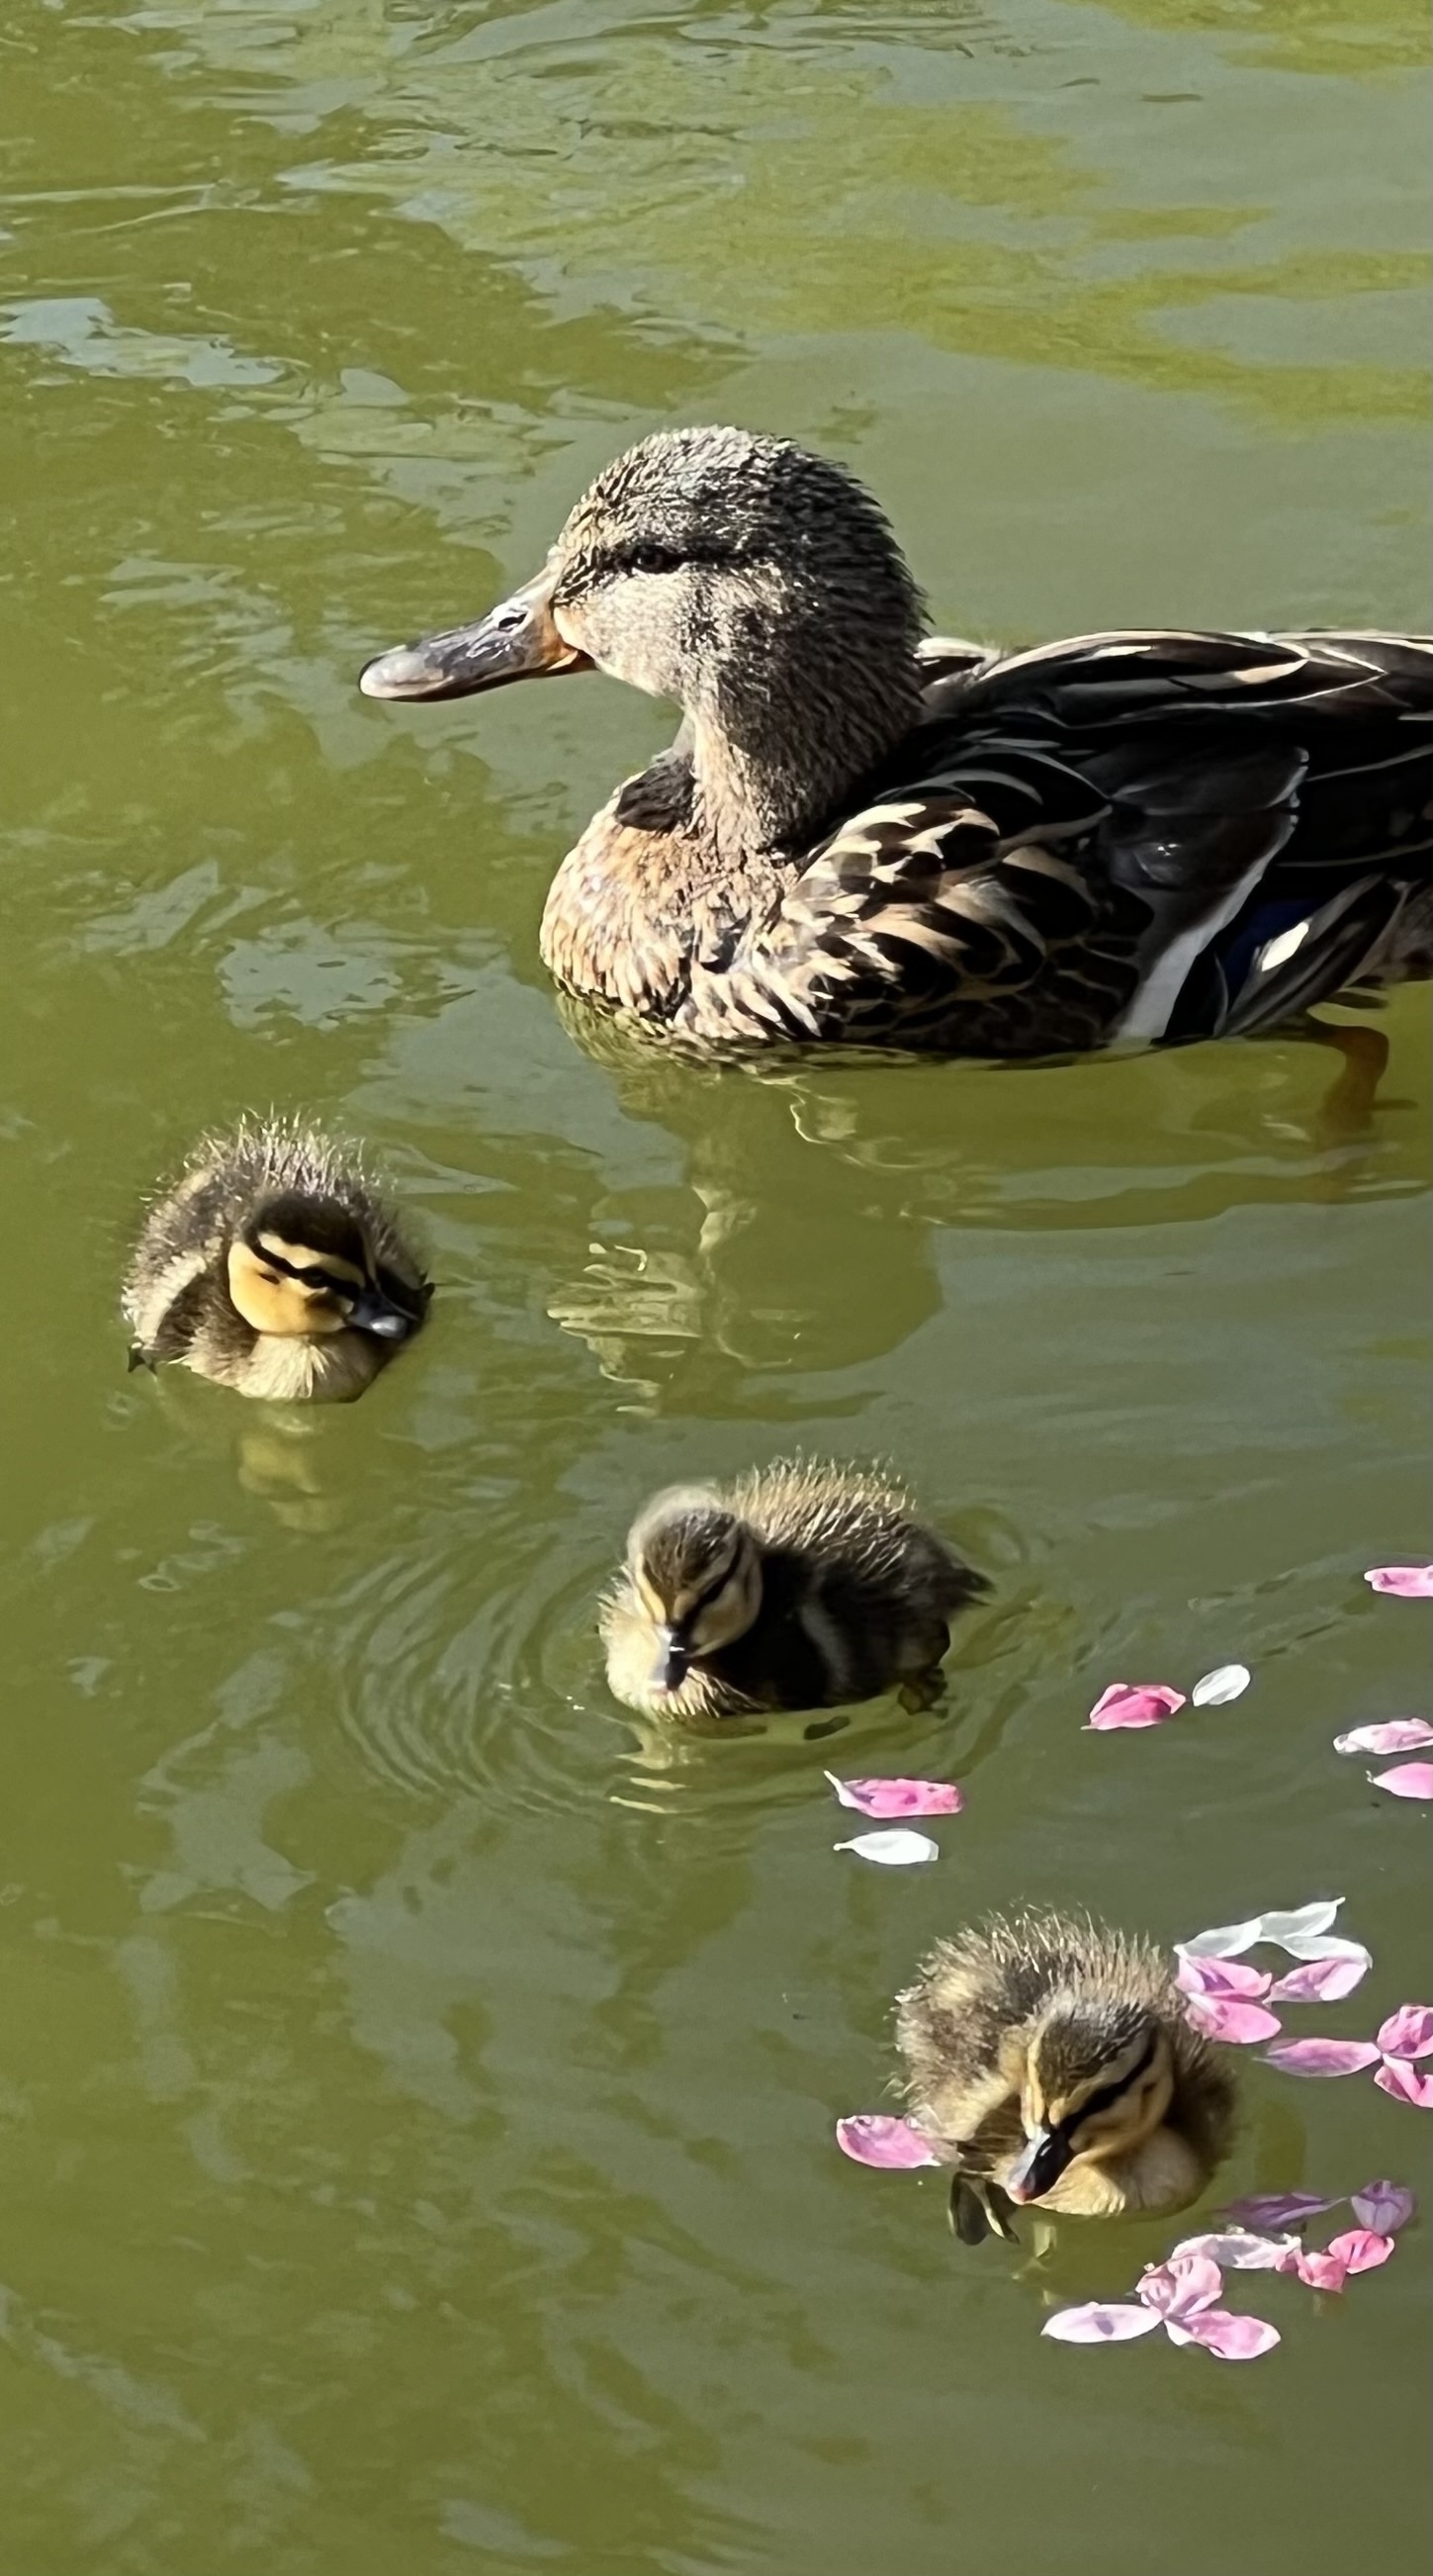 Auto-generated description: A mother duck swims in greenish water alongside her three ducklings, with pink flower petals scattered around them.